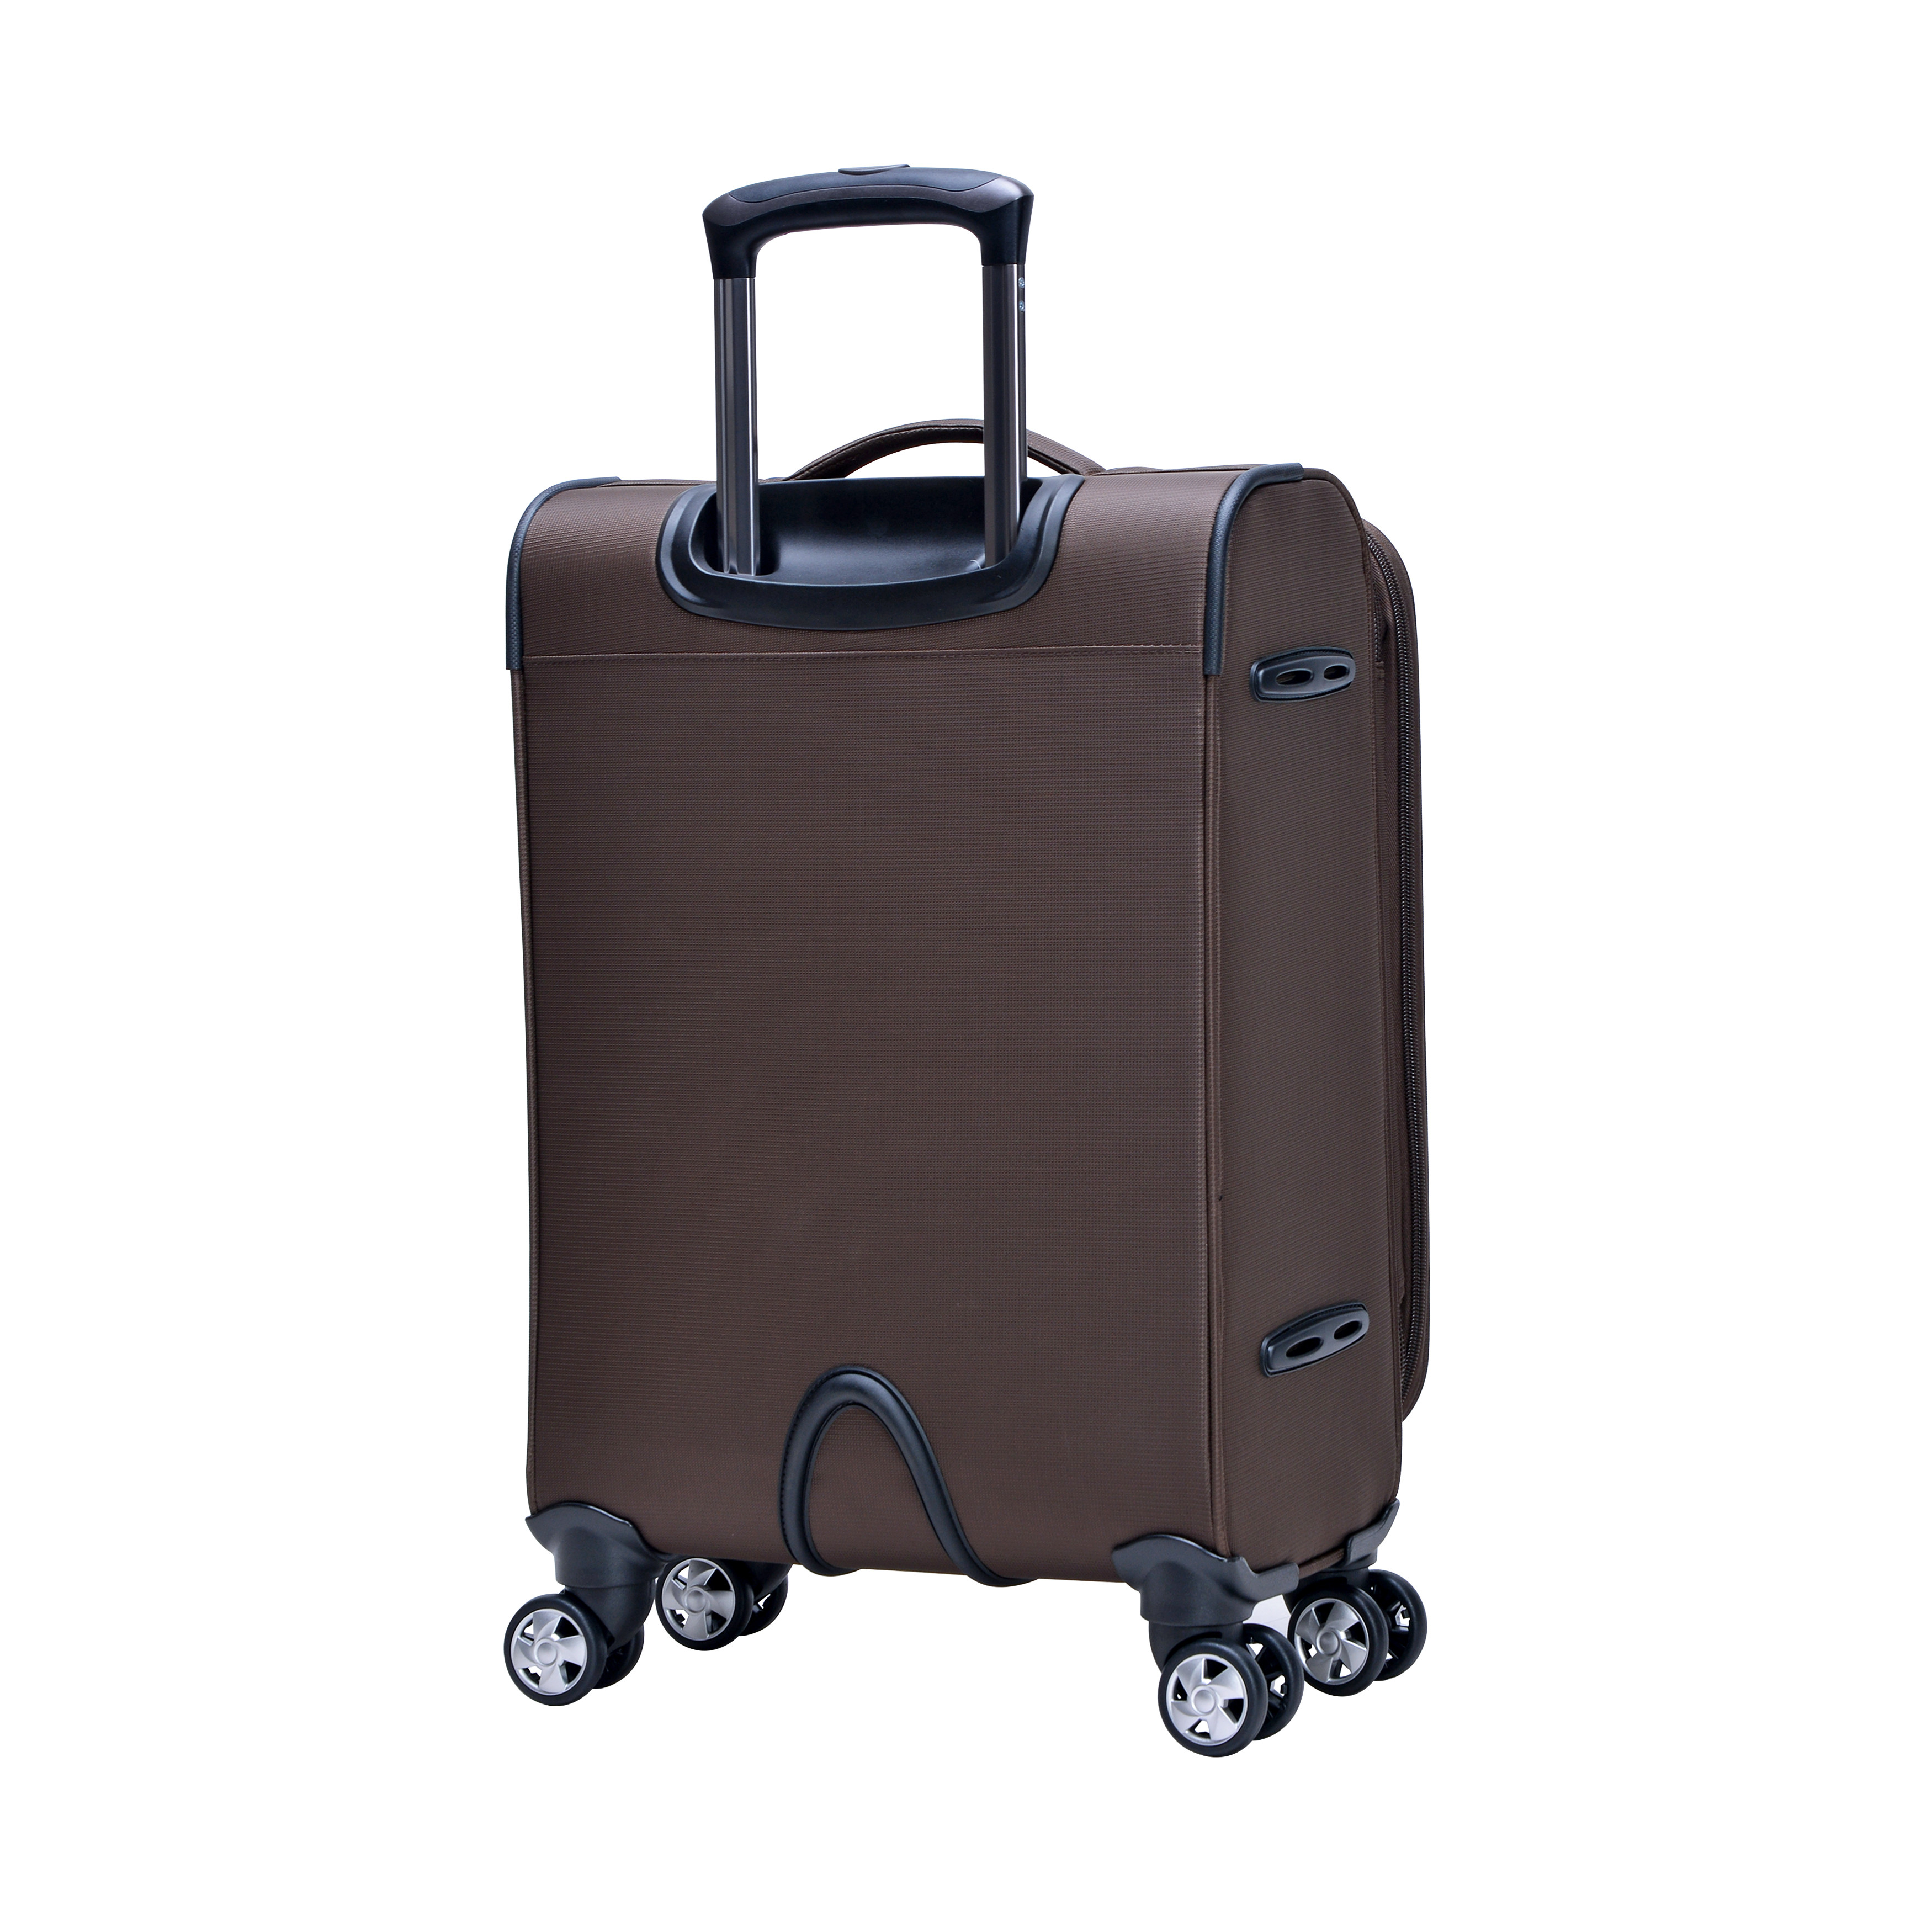 Eminent 4 Wheel Soft Casing Expandable Recycled Cabin Luggage Trolley 55cm Camel&nbsp;V6093SZ-20